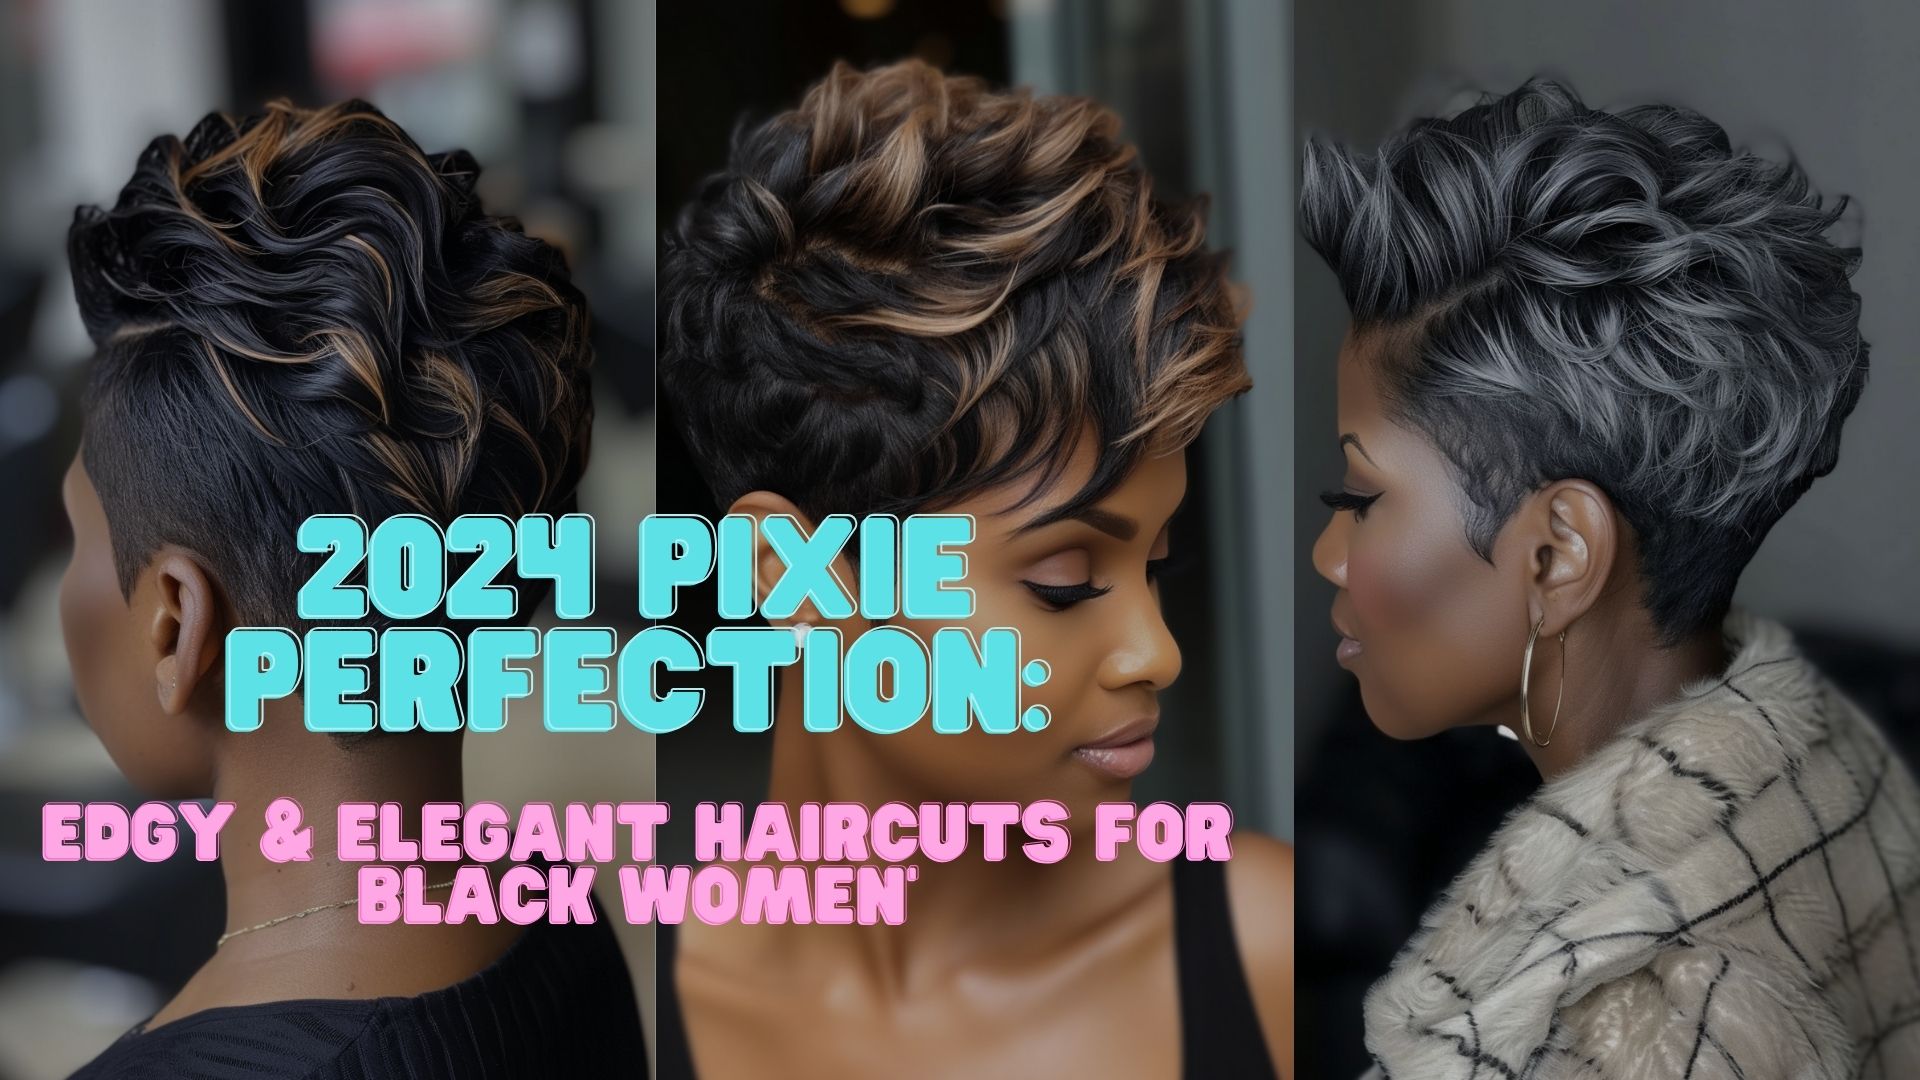 🌟 2024 Pixie Perfection: Edgy & Elegant Haircuts for Black Women